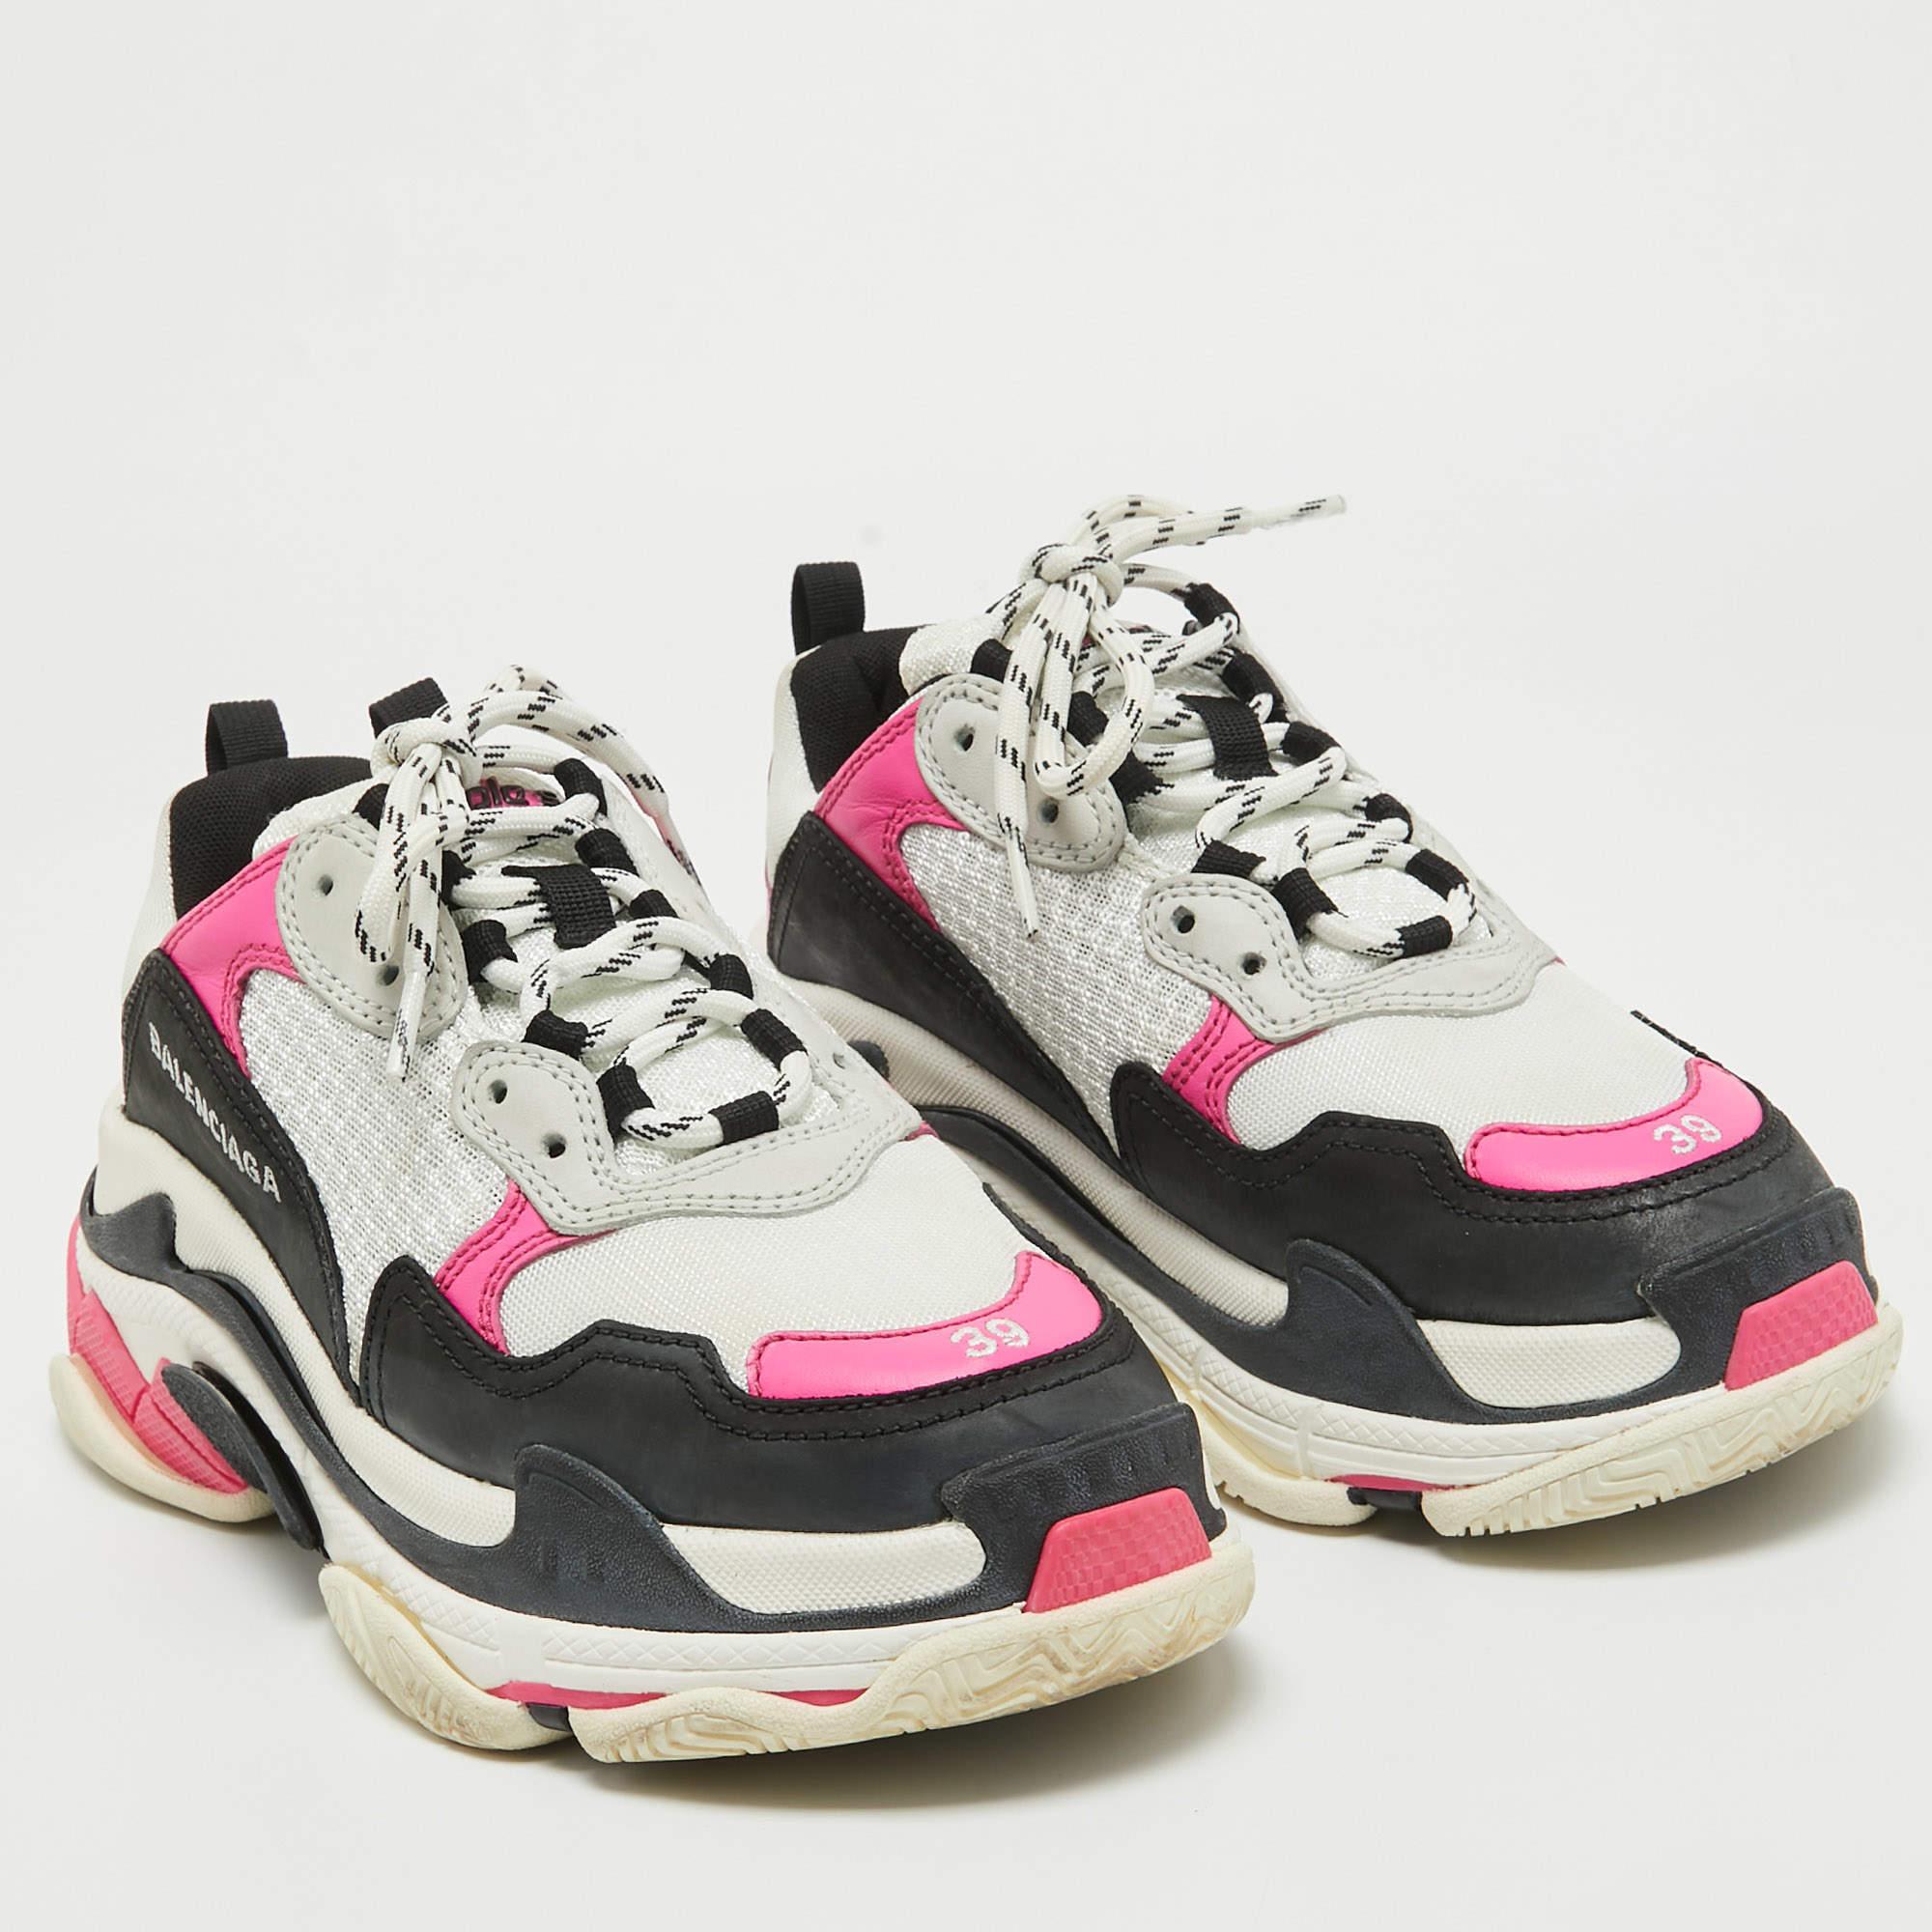 Balenciaga Multicolor Leather and Mesh Triple S Sneakers Size 39 For Sale 1